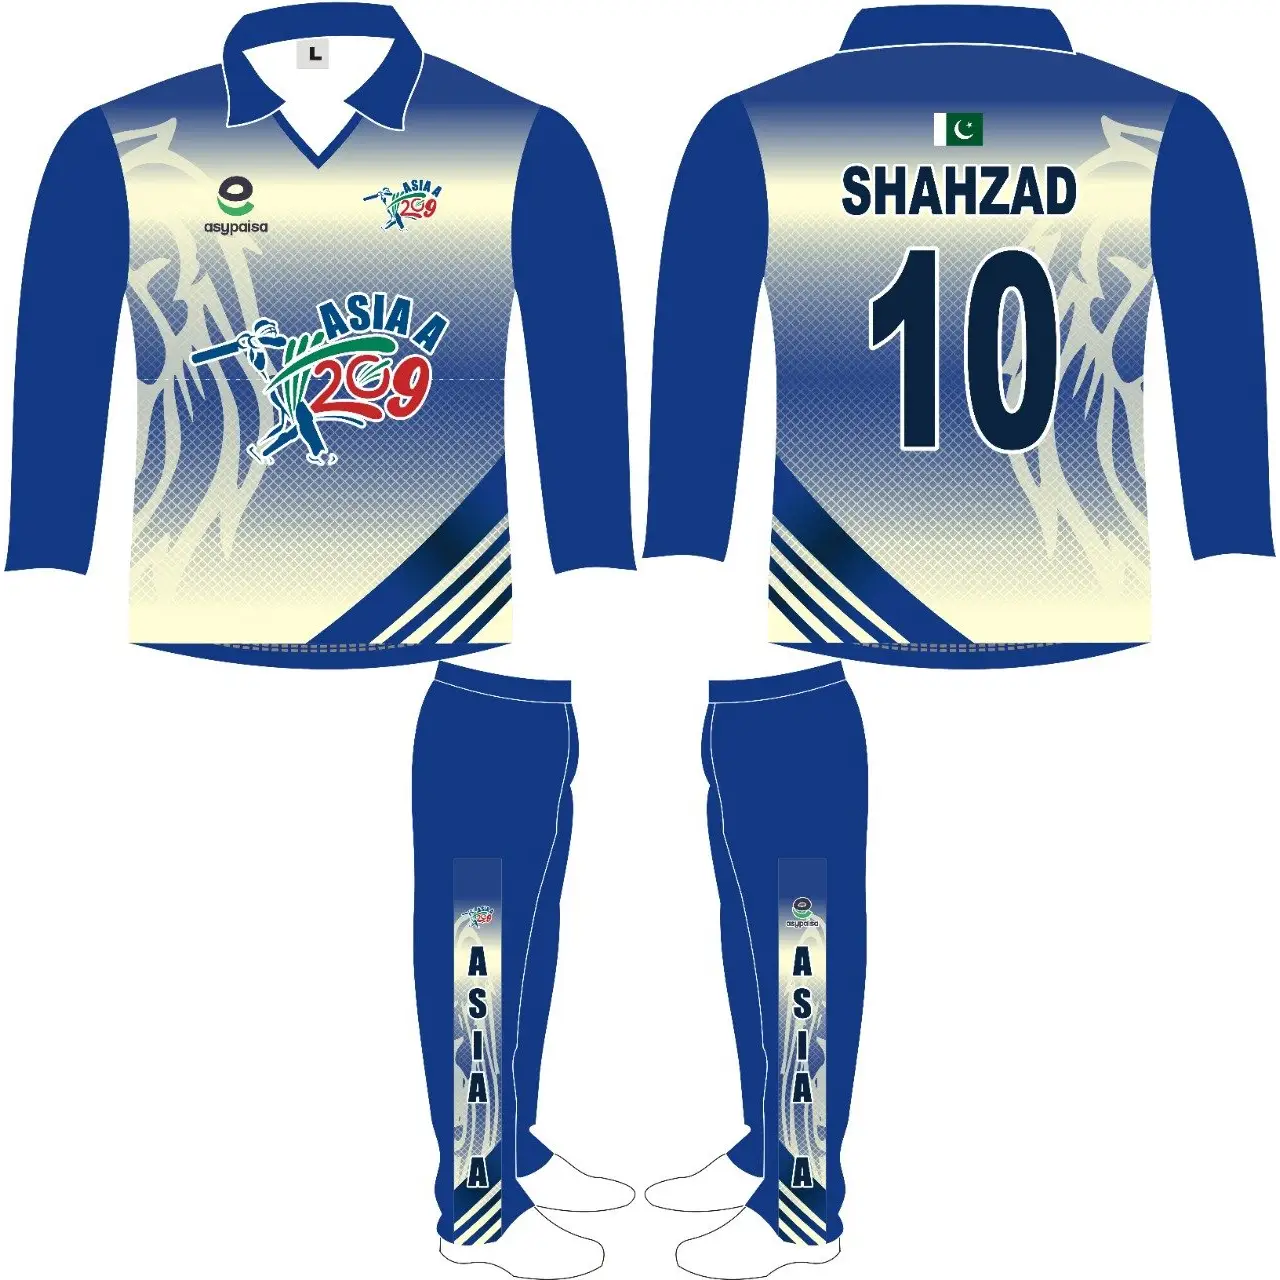 New jersey designs, Full sublimation Jersey free change team name, num